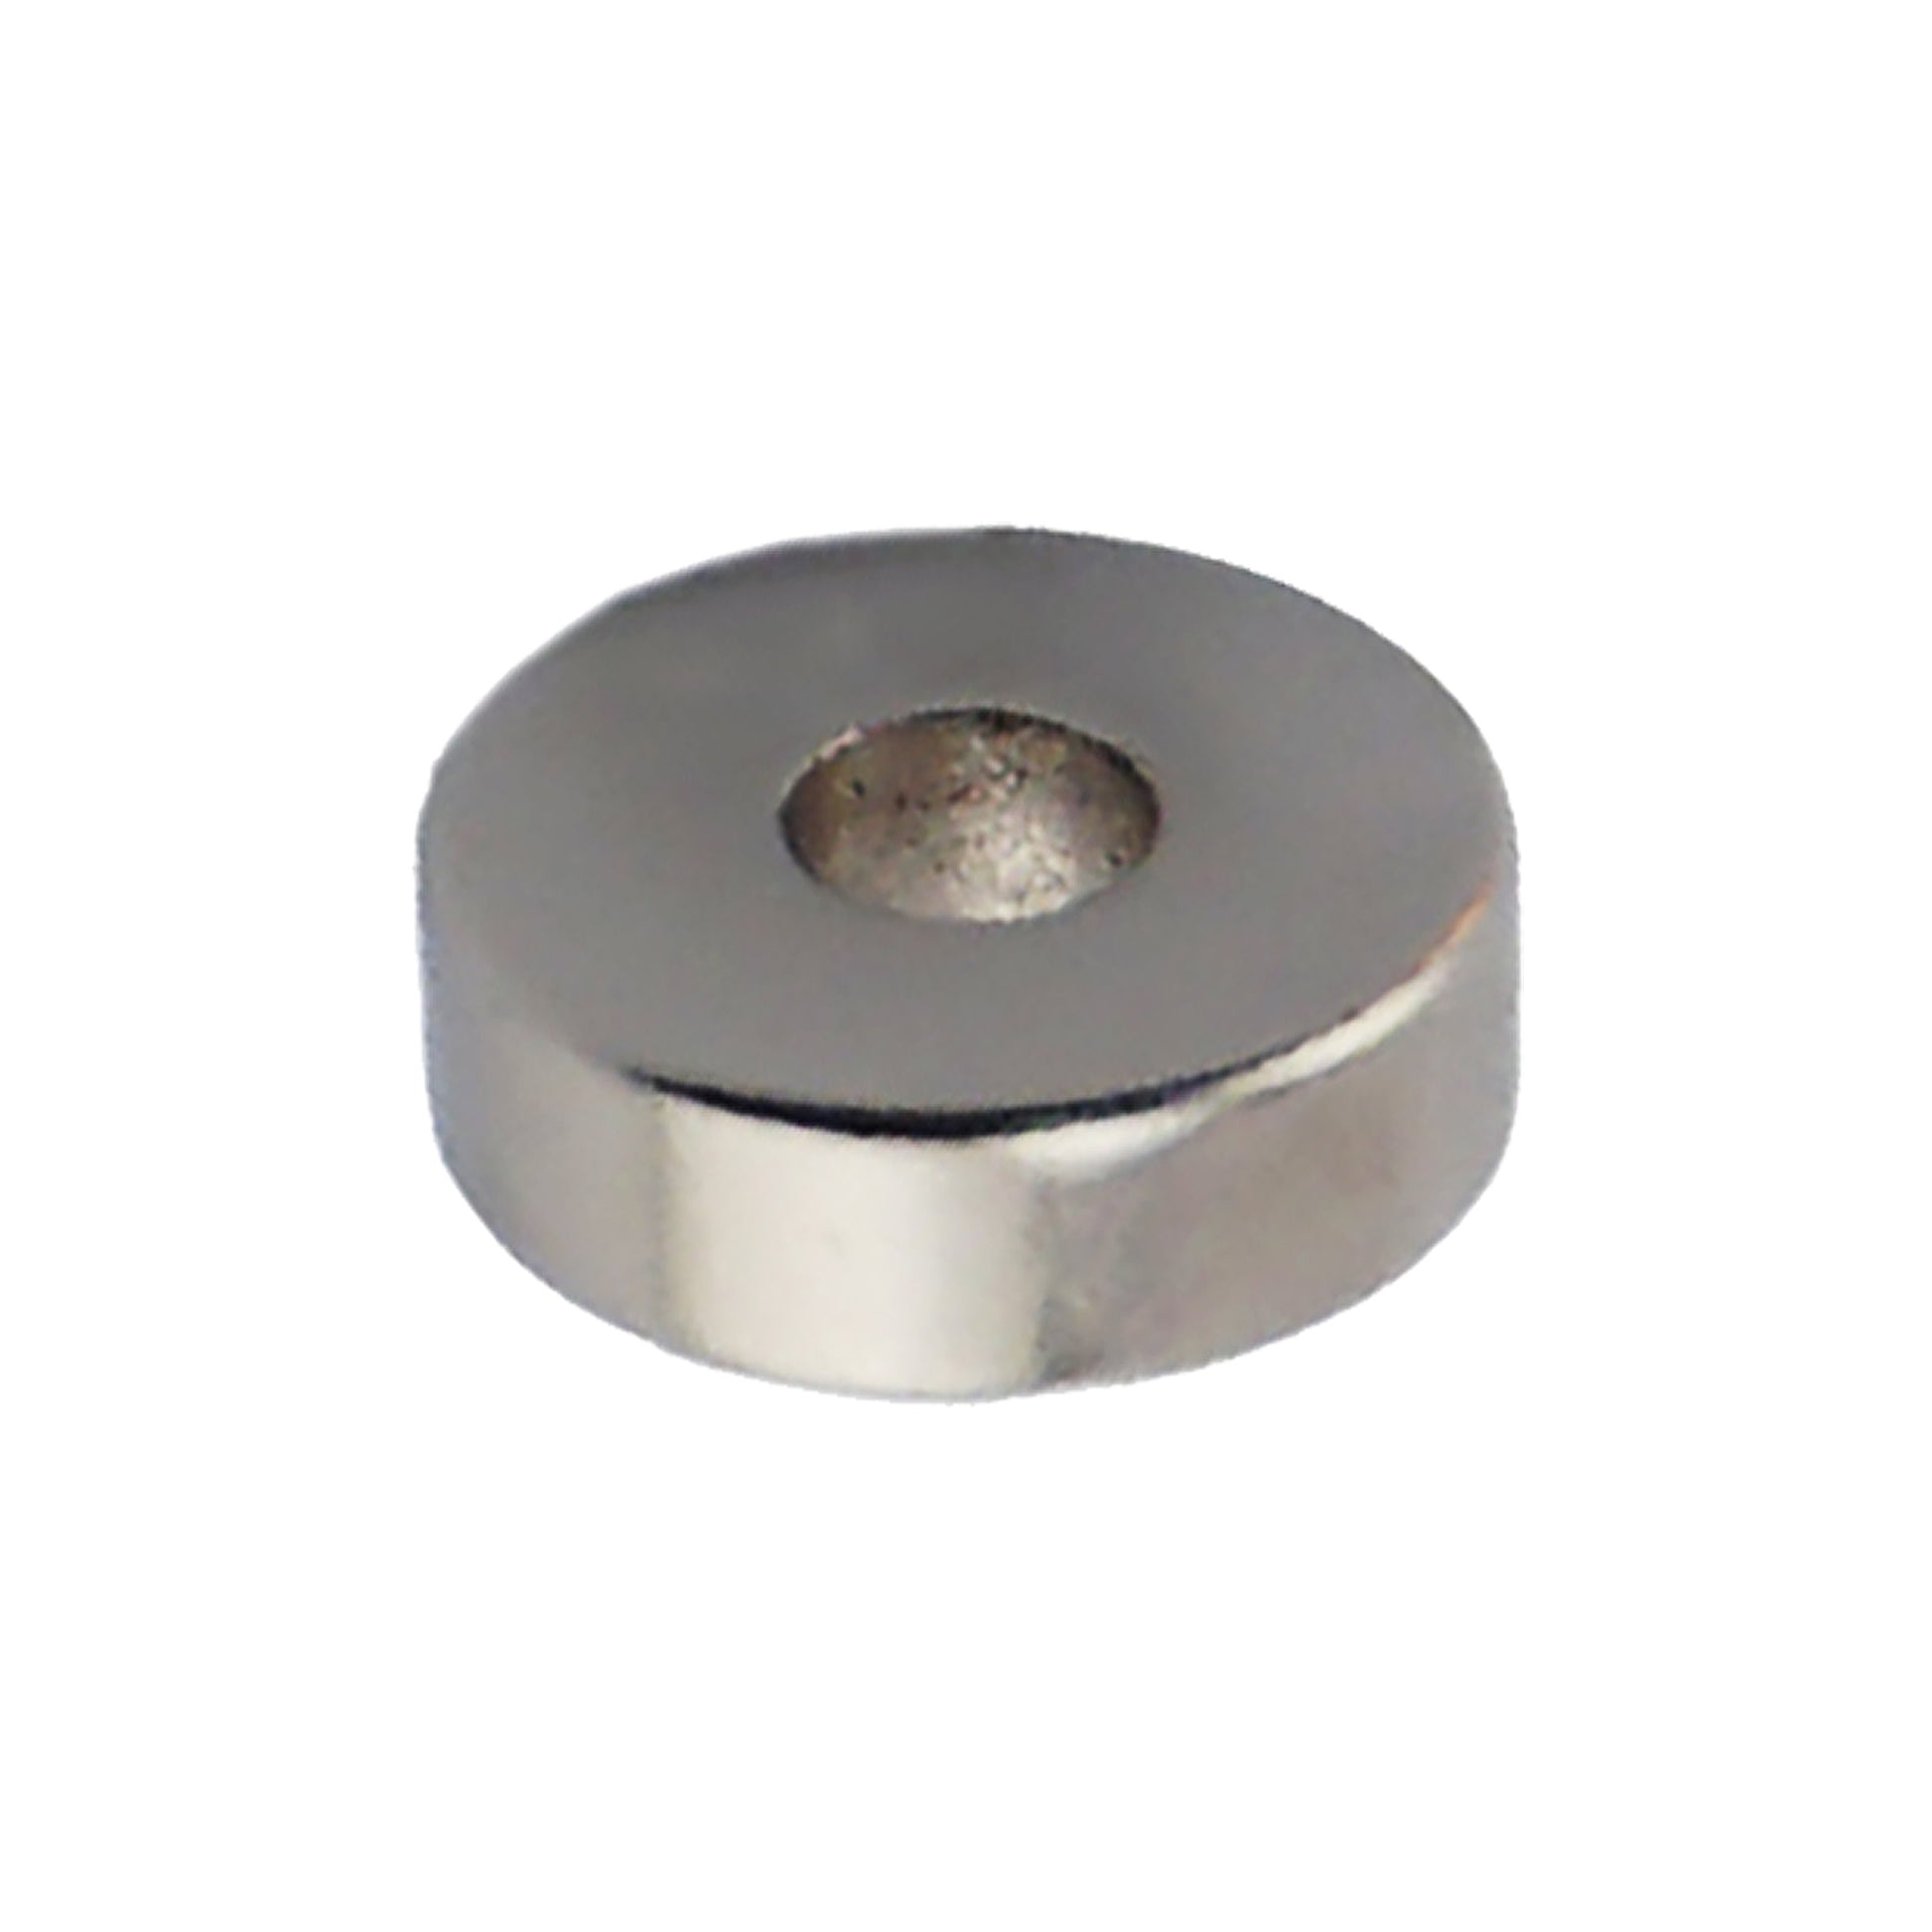 Load image into Gallery viewer, NR003719NS01 Neodymium Ring Magnet - Front View